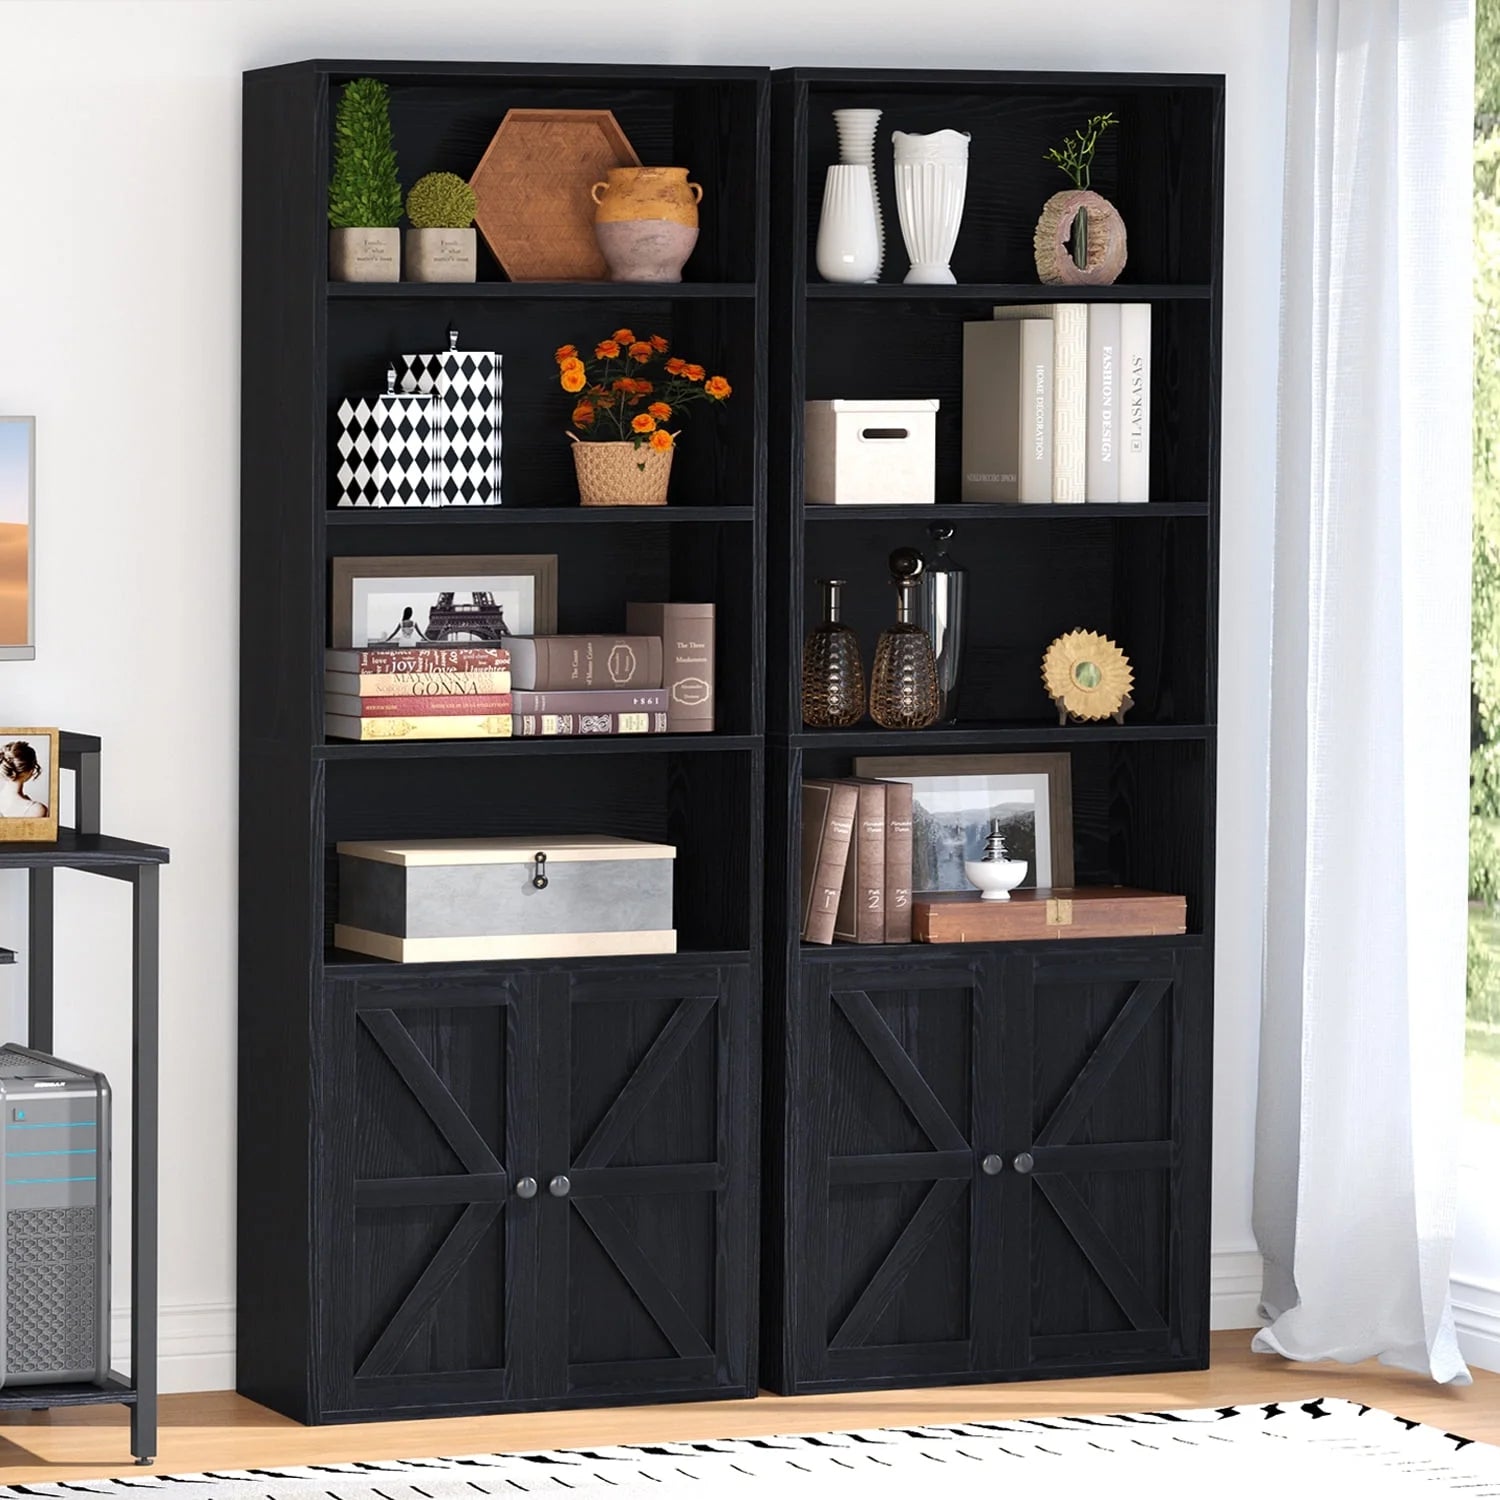 6 Shelf Bookcase with Doors 71in Tall Bookshelf for Home Office, Black